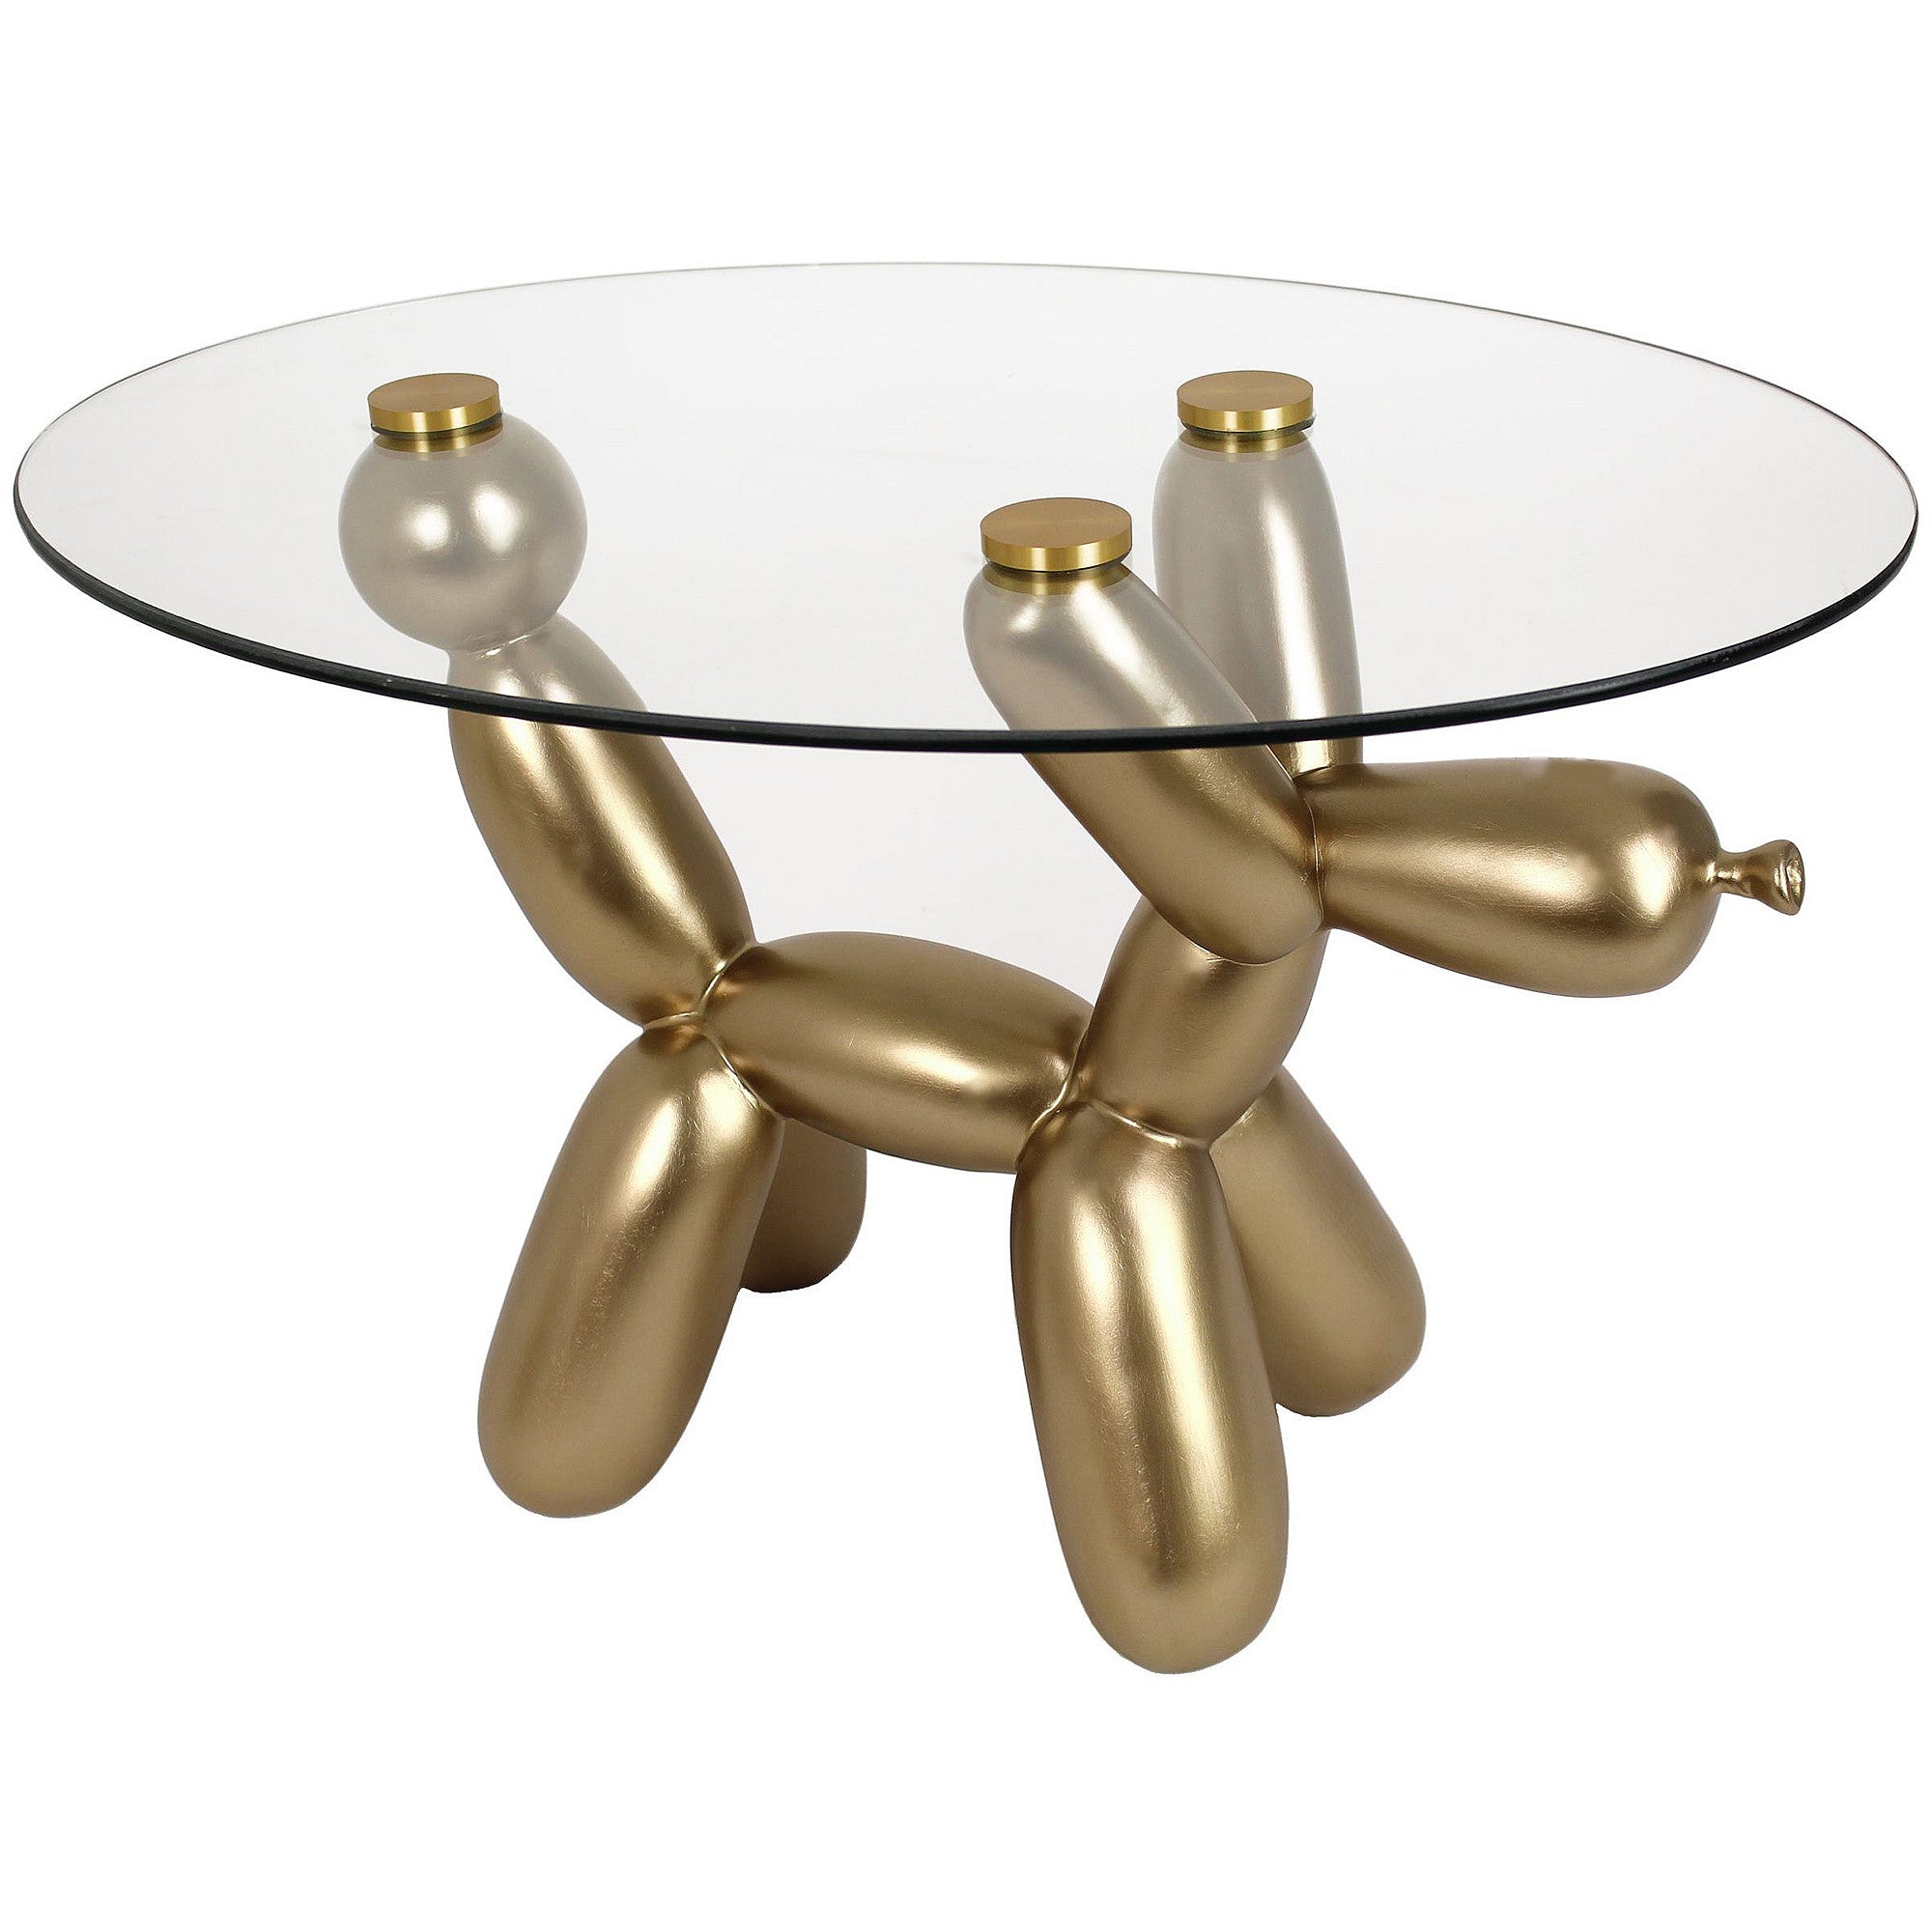 Milo Gold Balloon Dog Occasional Table